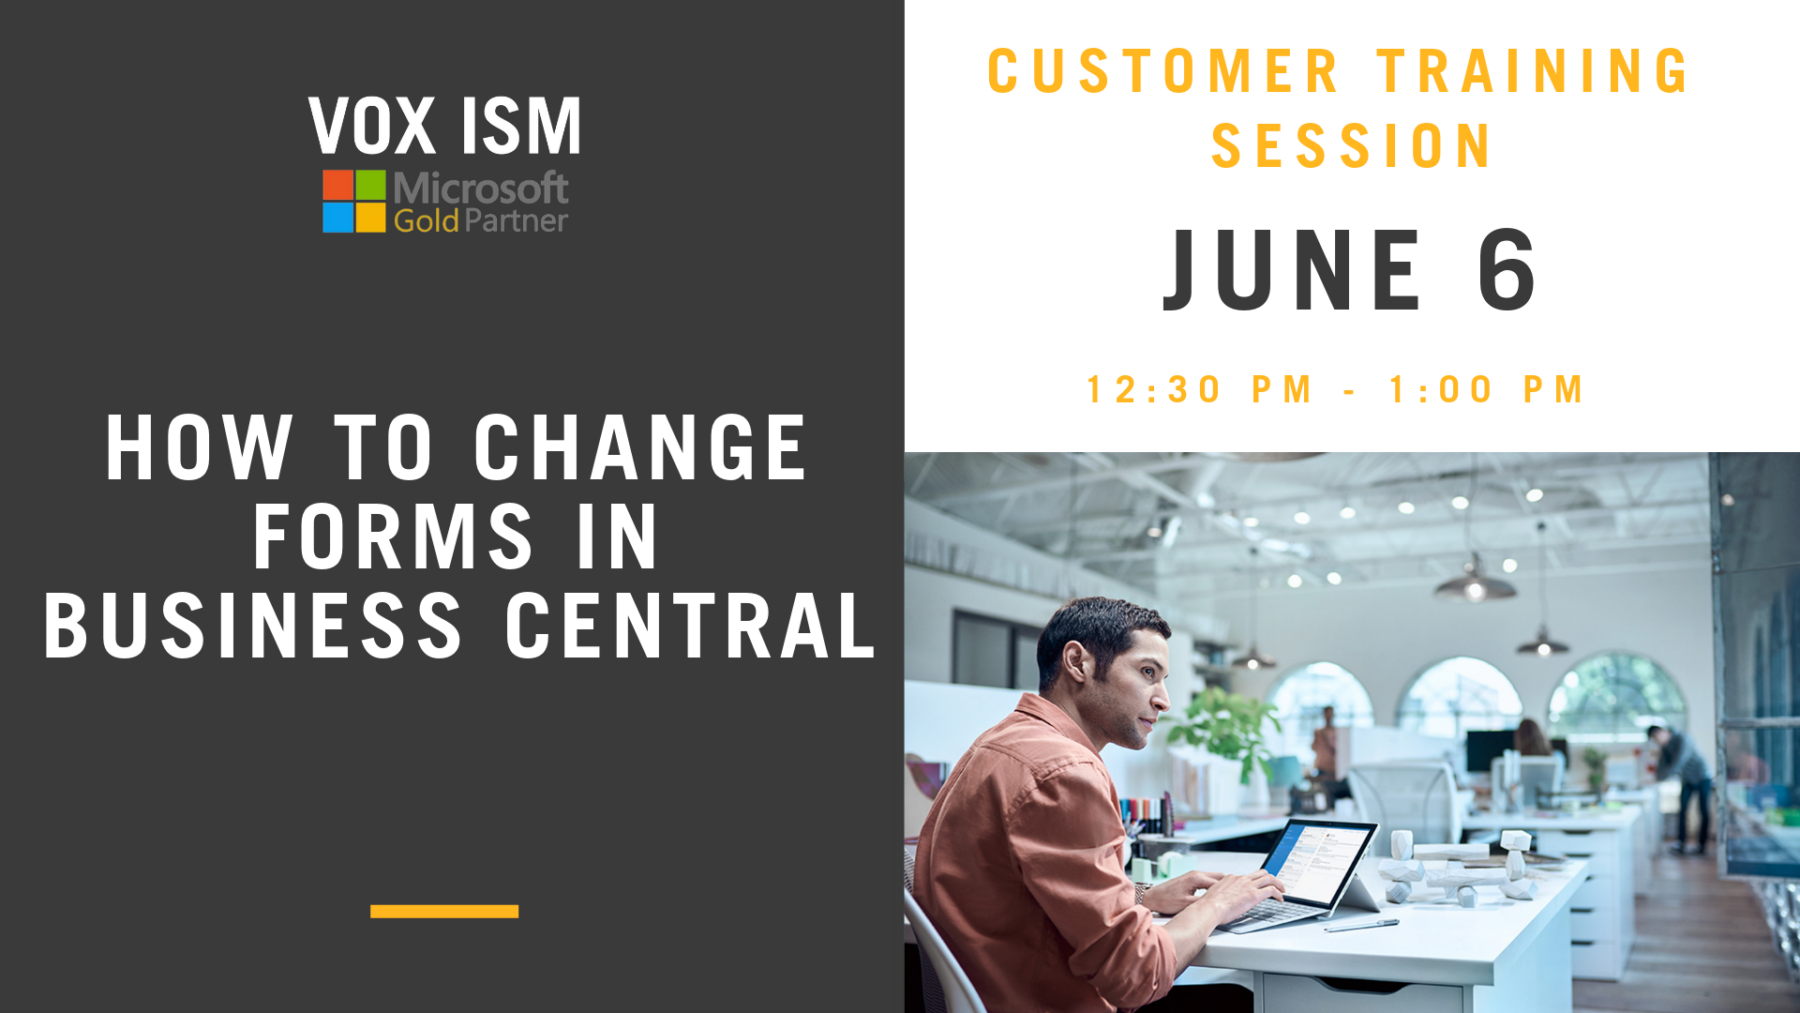 How To Change Forms in Business Central – June 6 – Customer Session